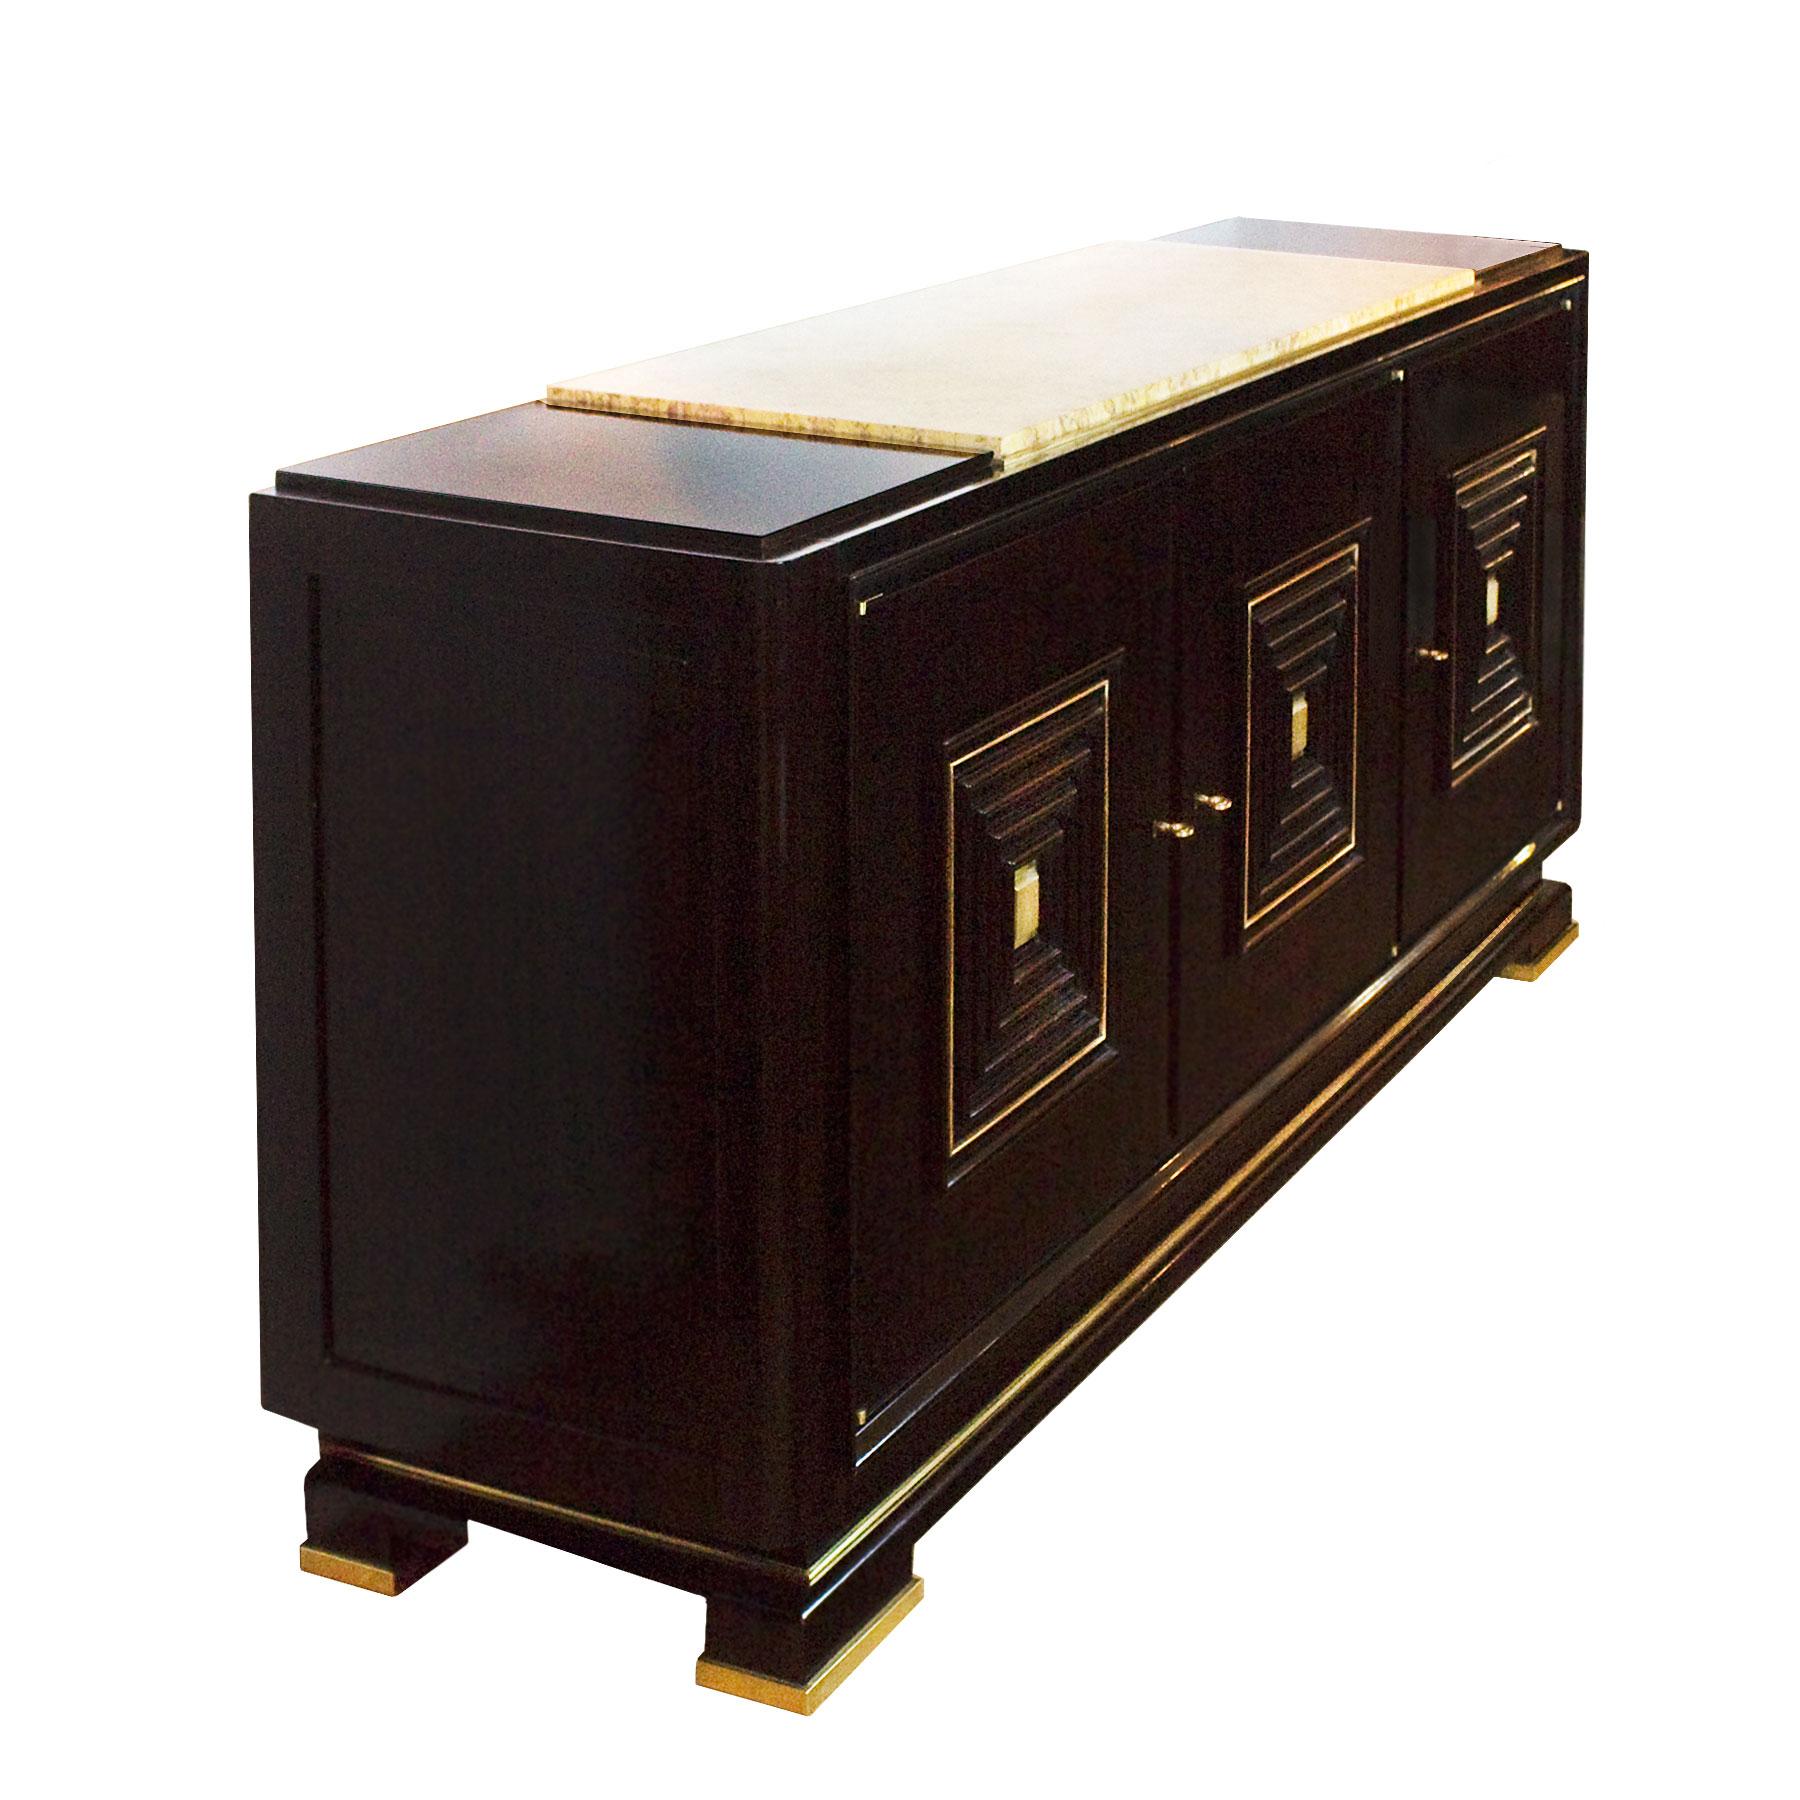 Spectacular sideboard, solid and stained mahogany, French polish with satiny finish. Doors decorated with concentric squares in wood and brass. Decorative polished brass rods in the base and in front of the marble top. Side doors with two shelves